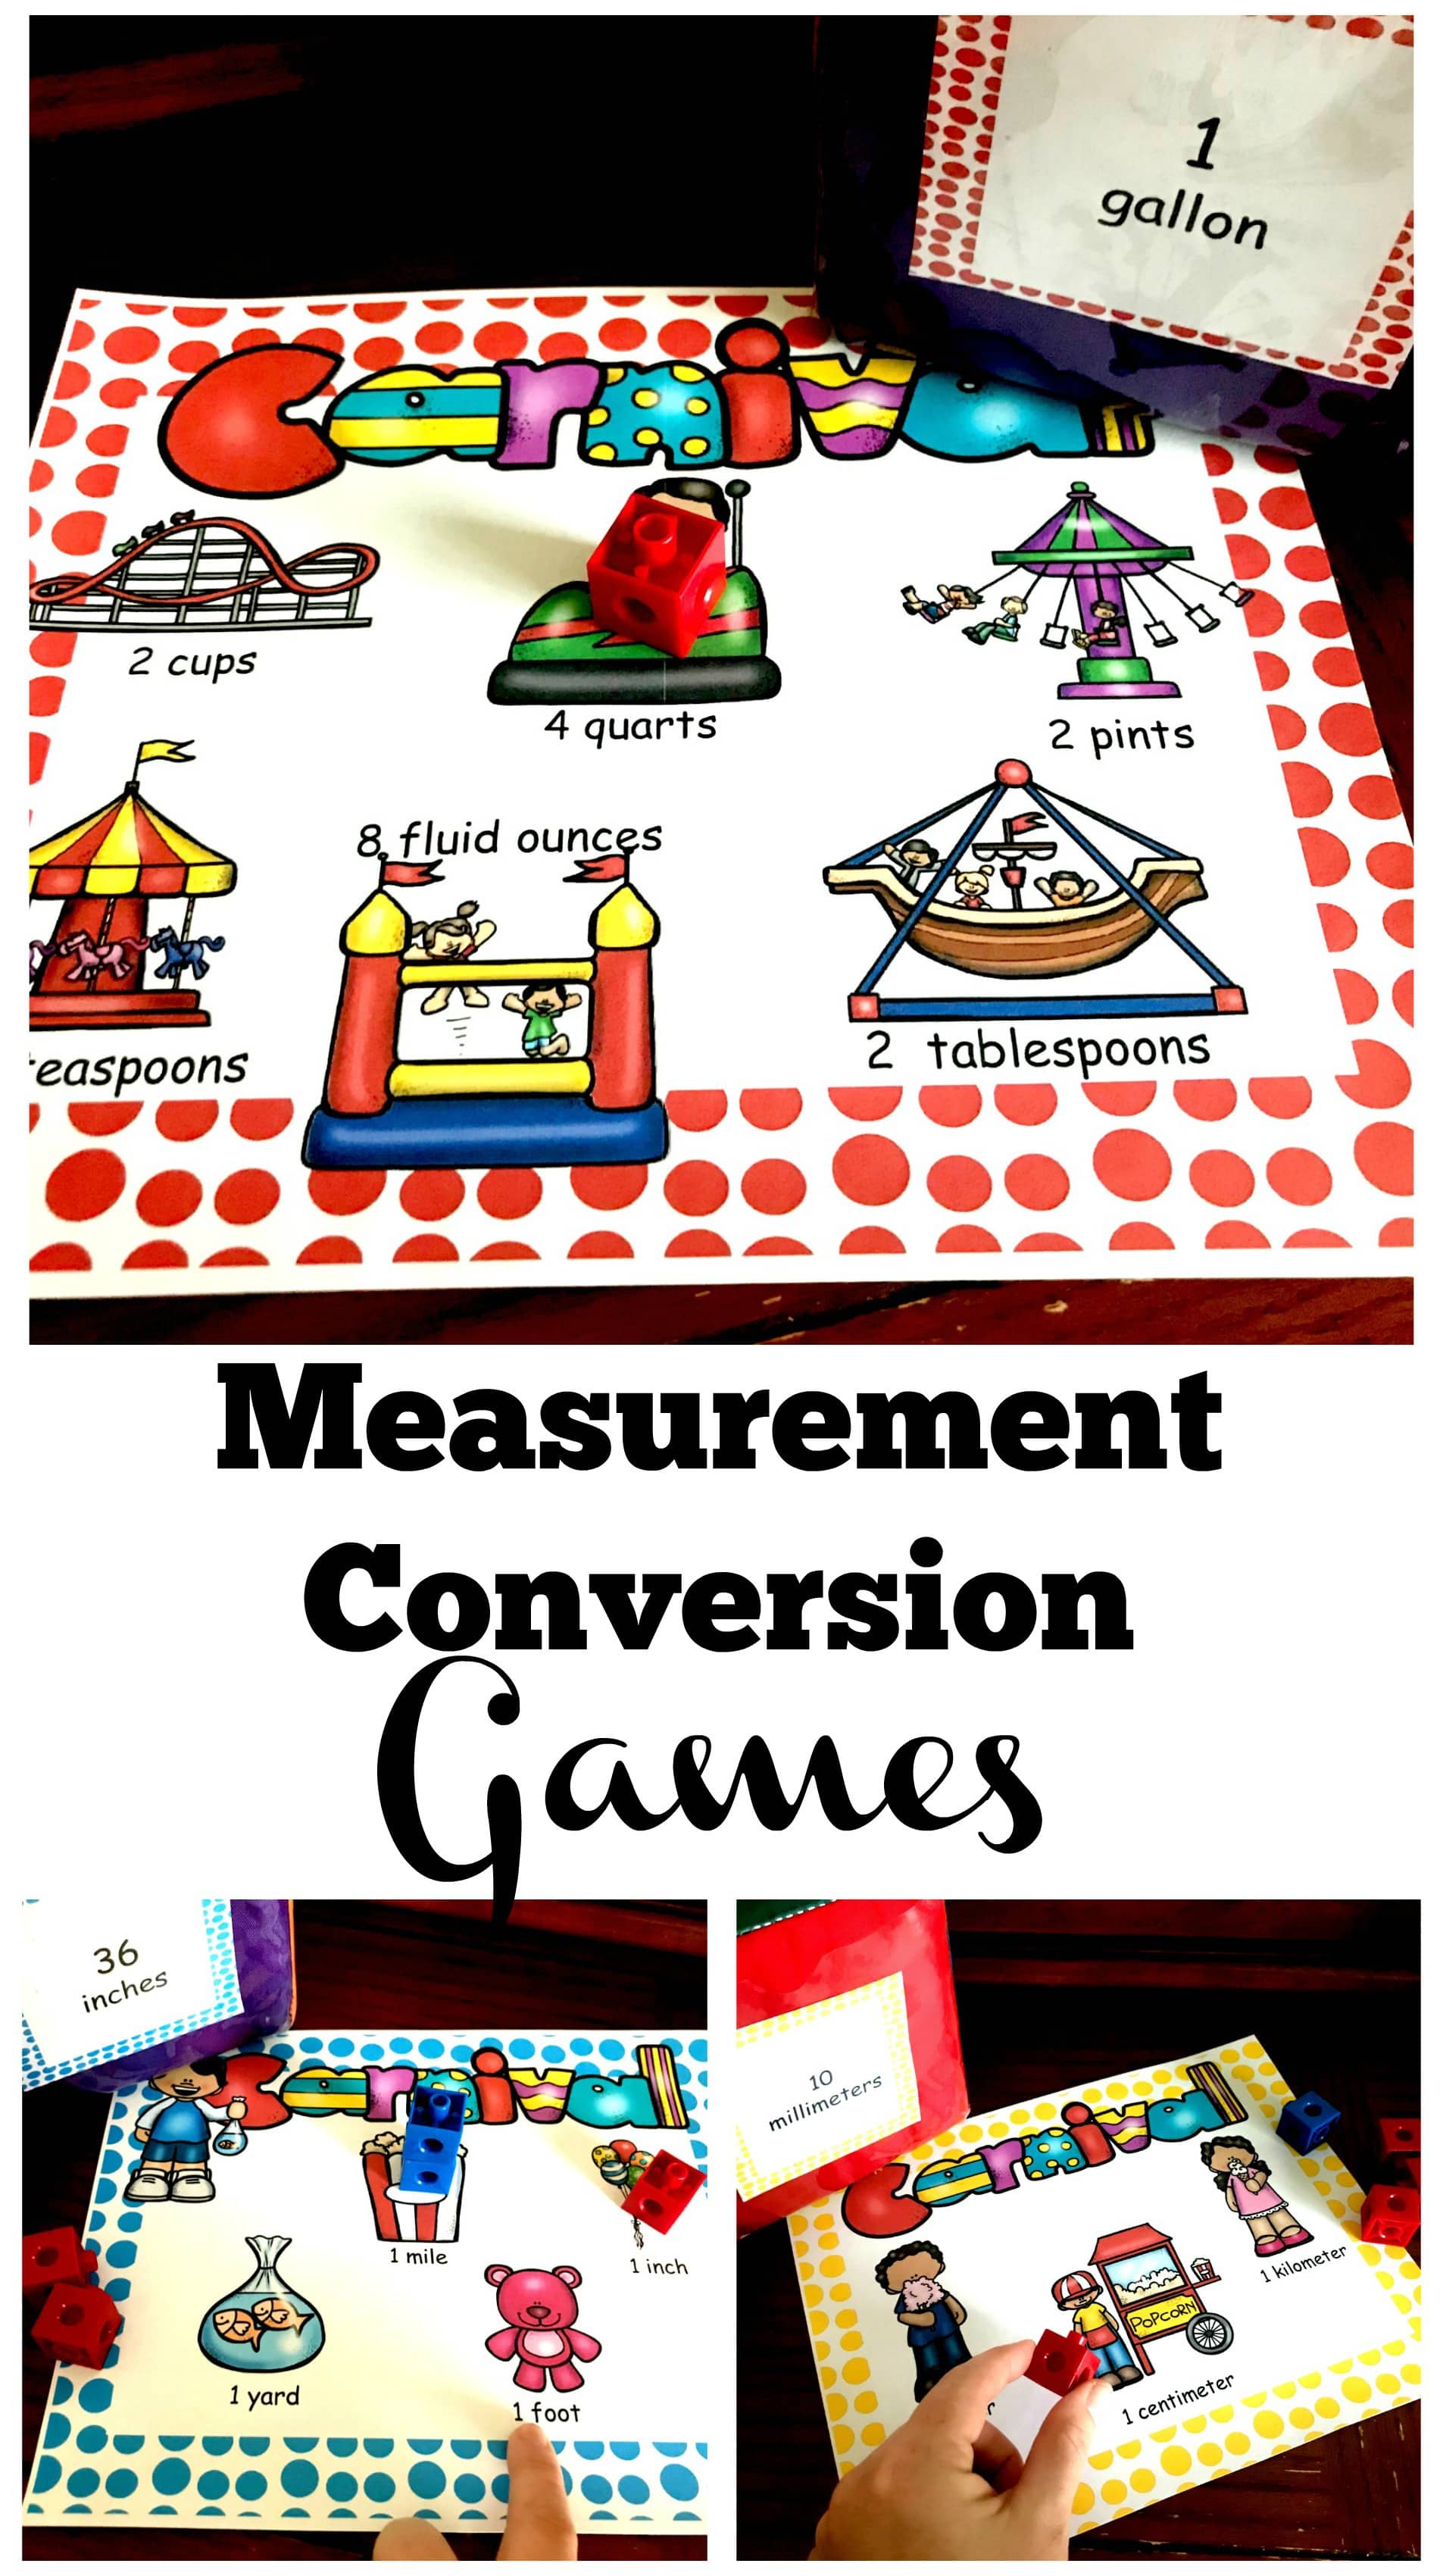 Three Measurement Conversion Games to Practice Liquid, Length, and Metric Equivalences